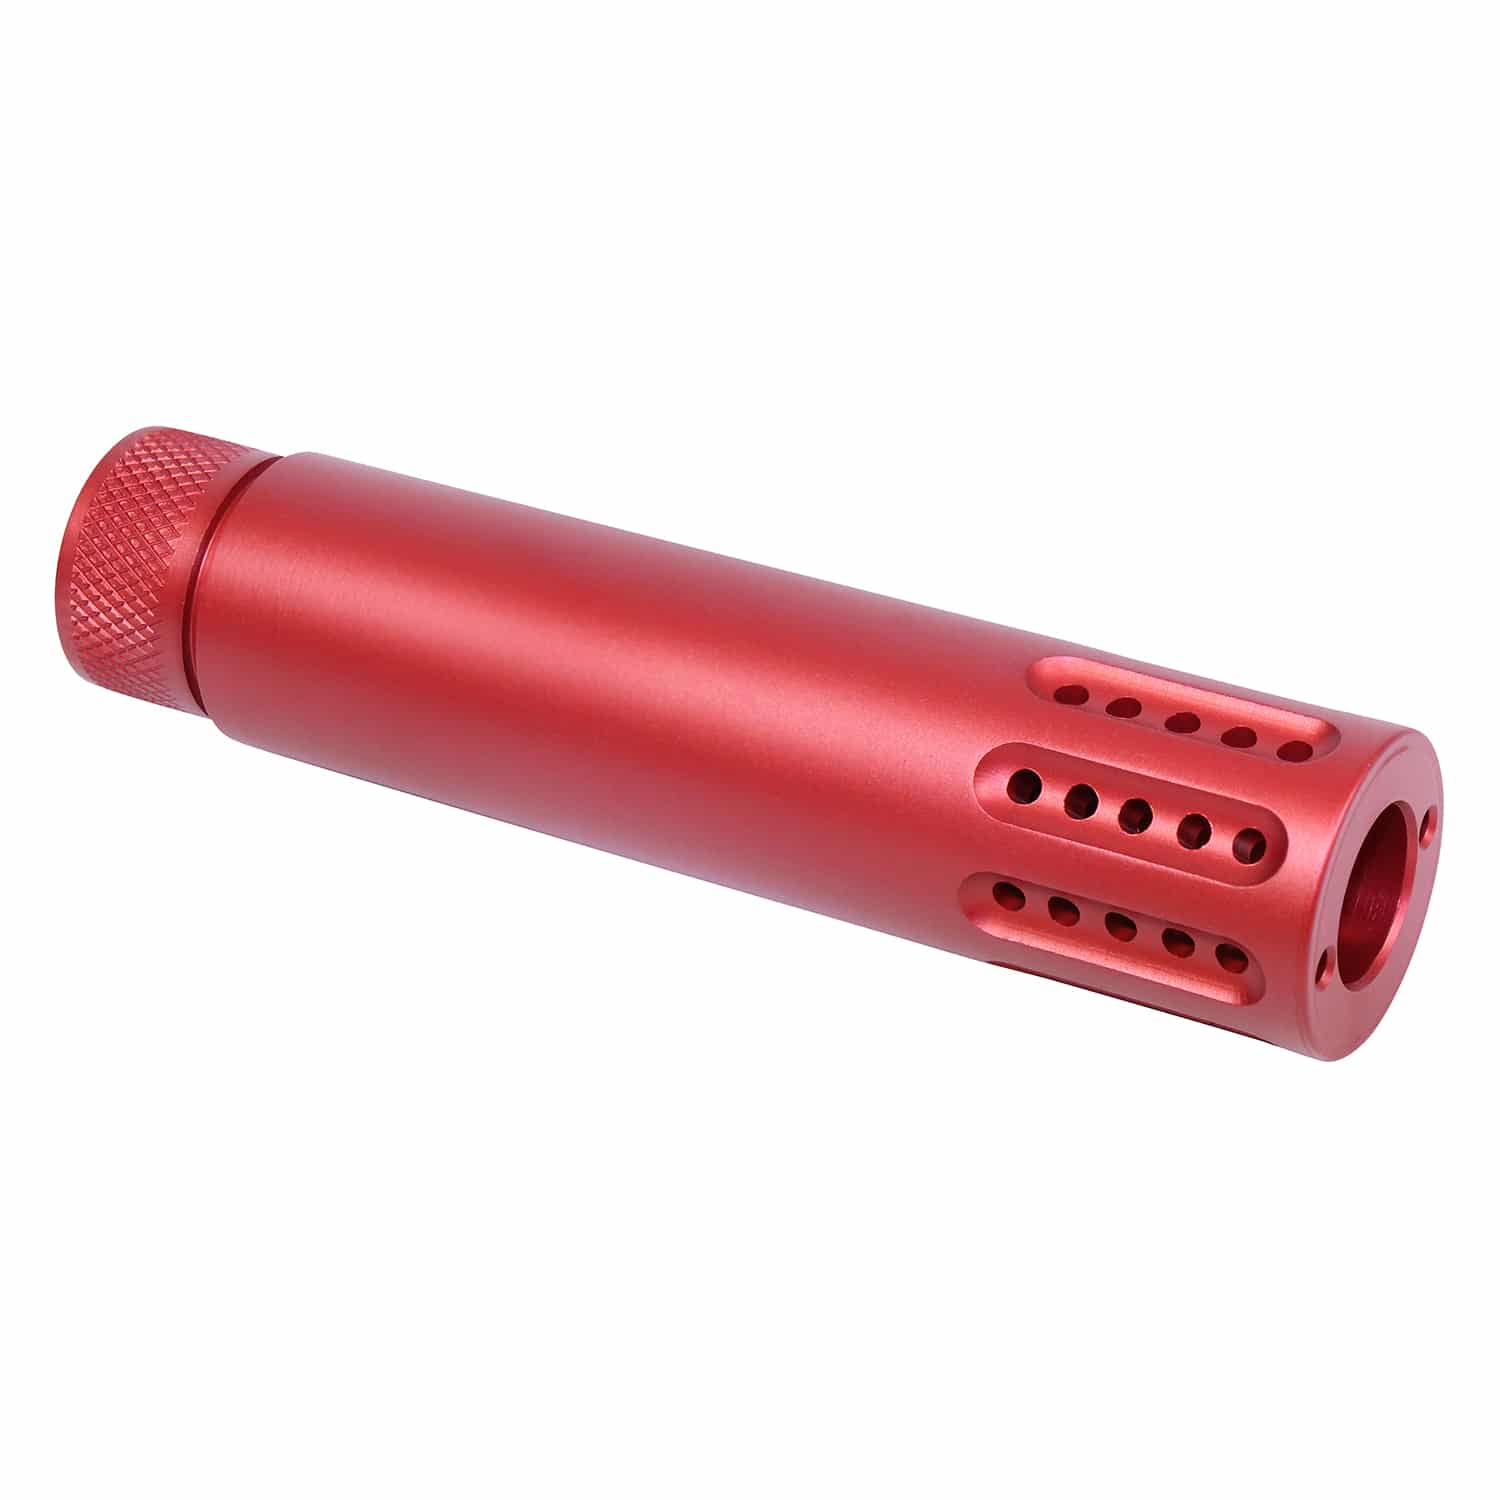 AR .308 Slip Over Fake Suppressor with Ported Muzzle Brake in Anodized Red